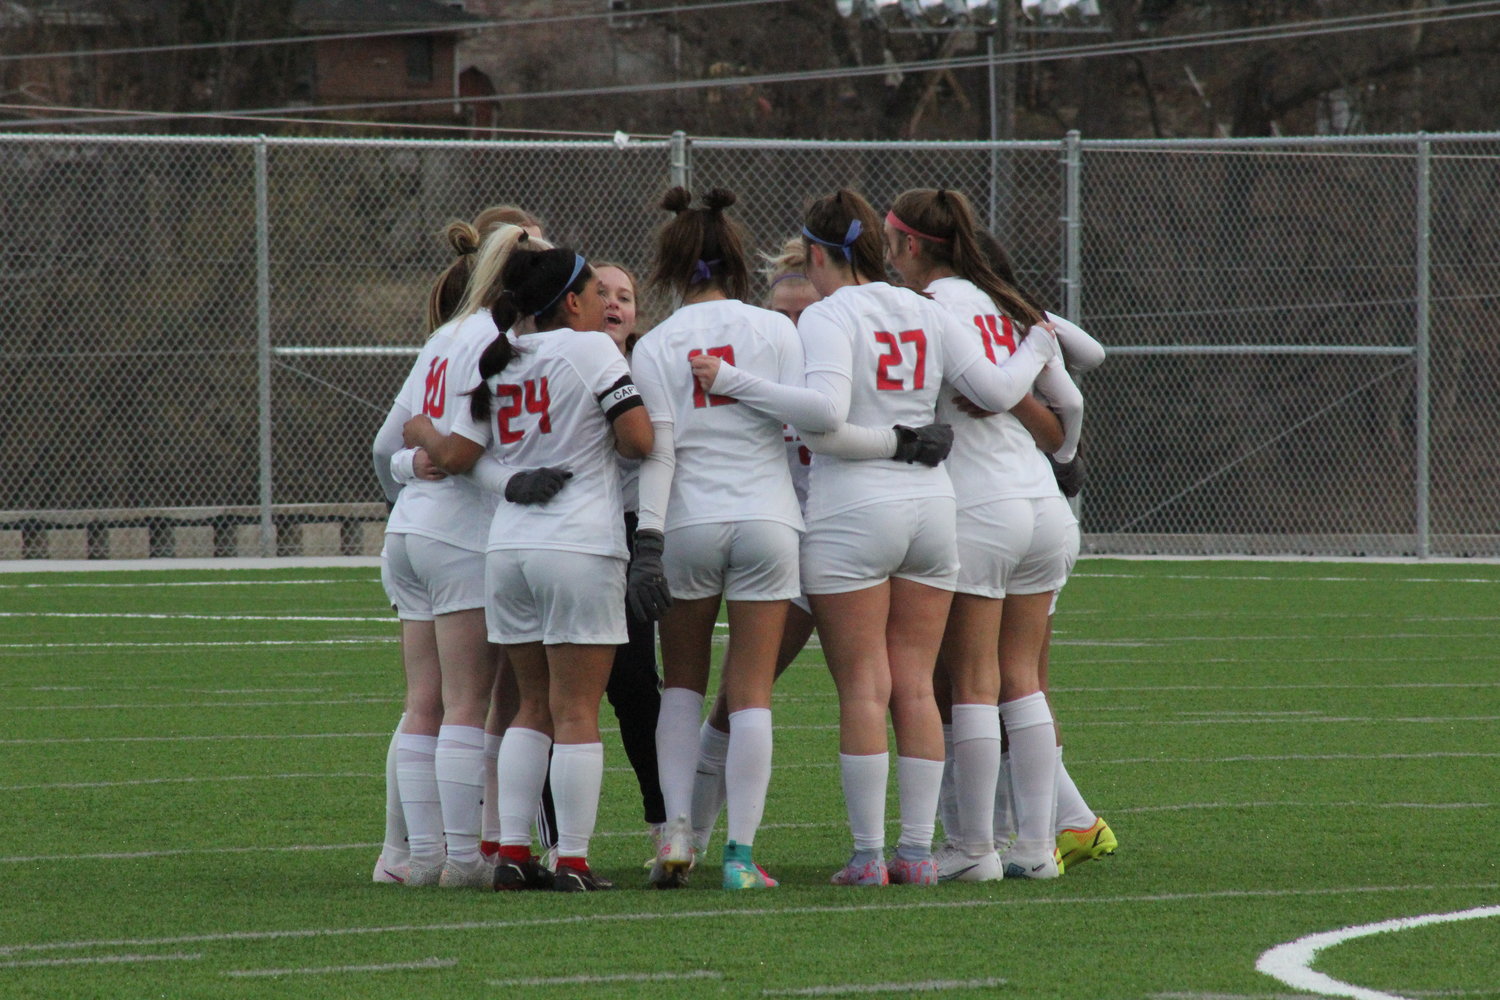 The Mexico Lady Bulldogs huddle before their season-opening game on Friday at Jefferson City. They lost 6-0 to the Lady Jays on Jefferson City's new field.